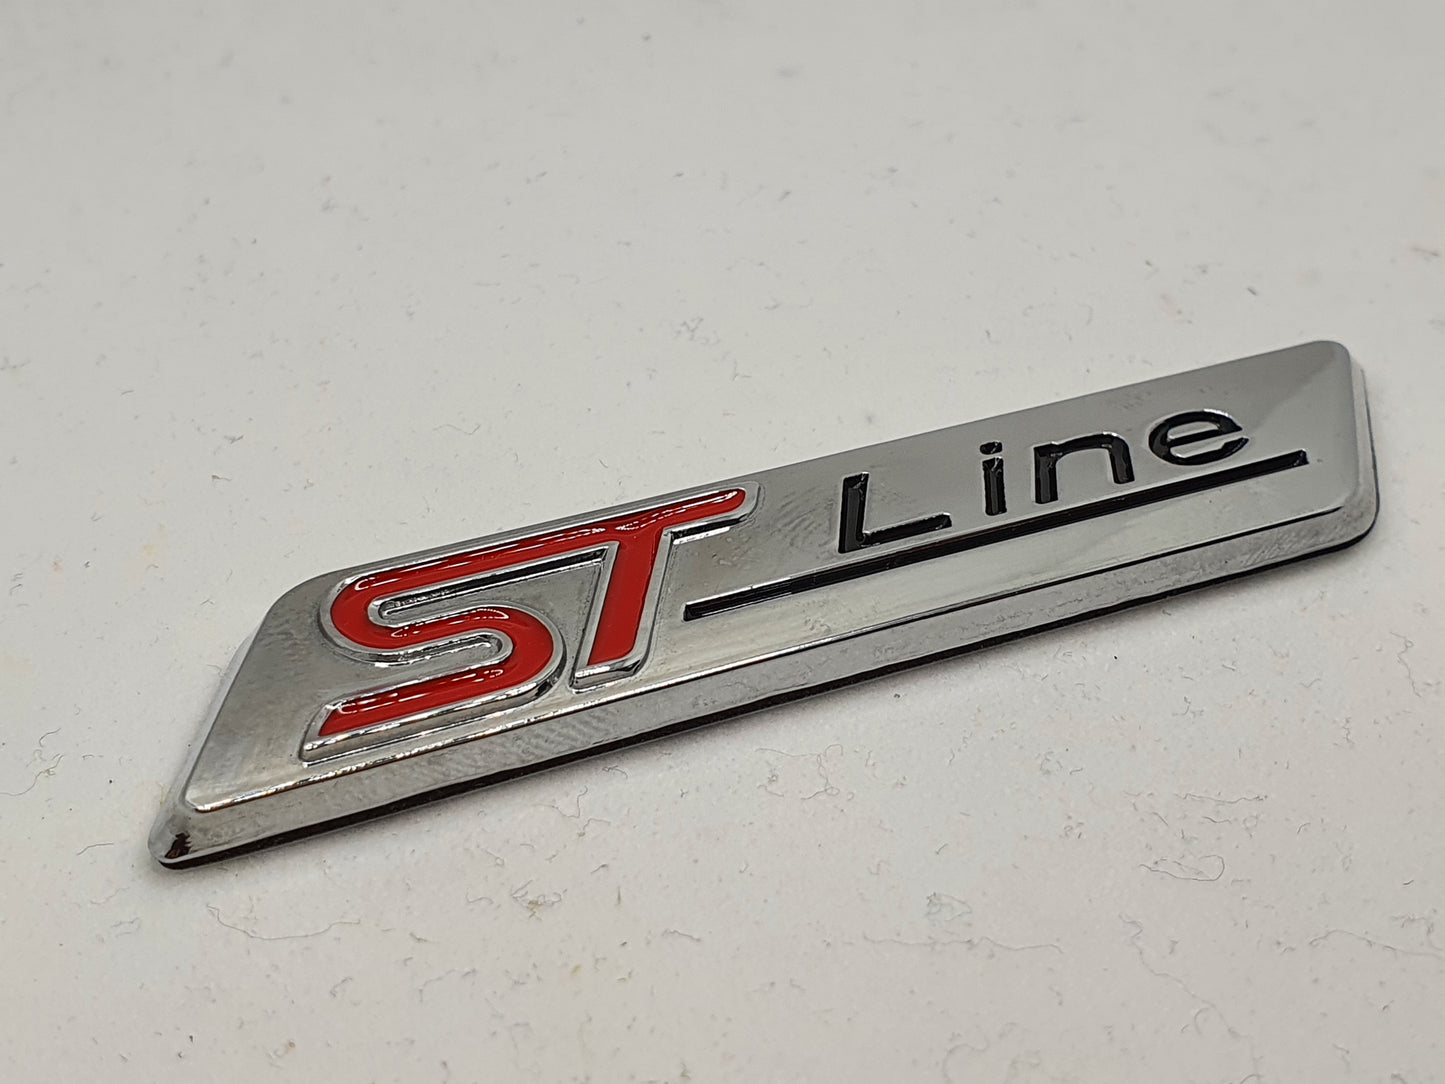 *** CLEARANCE *** ST-Line Wing Badge